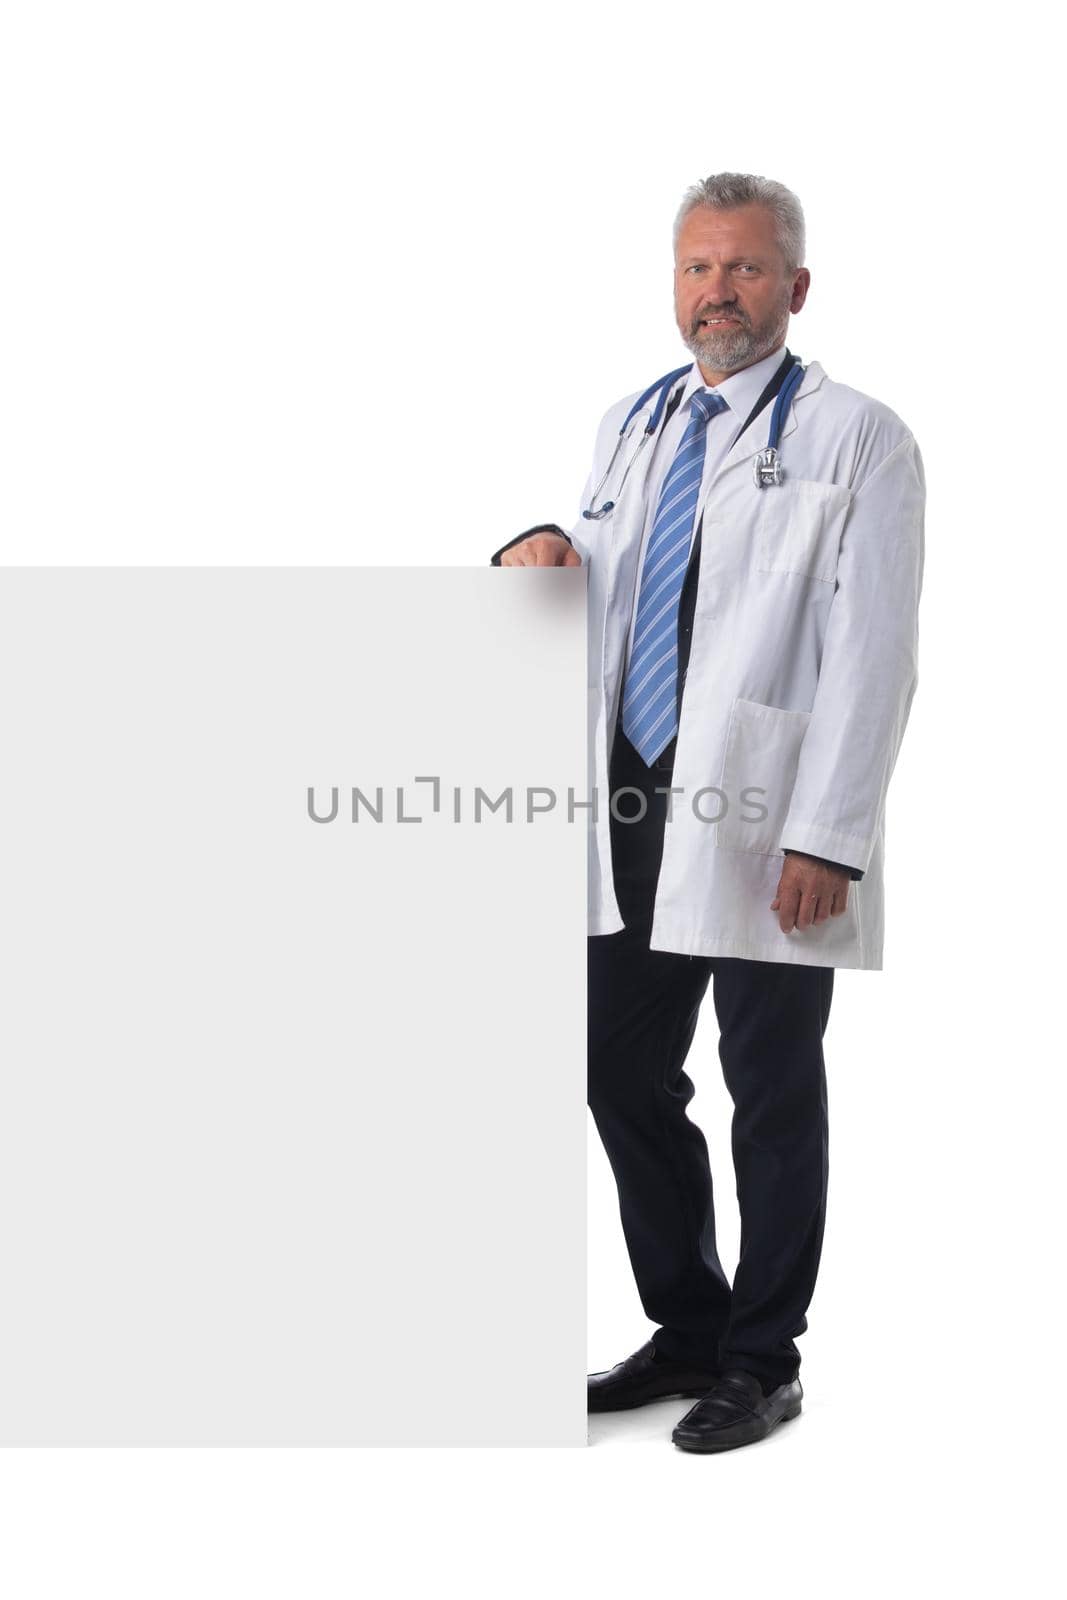 Mature doctor holding placard by ALotOfPeople